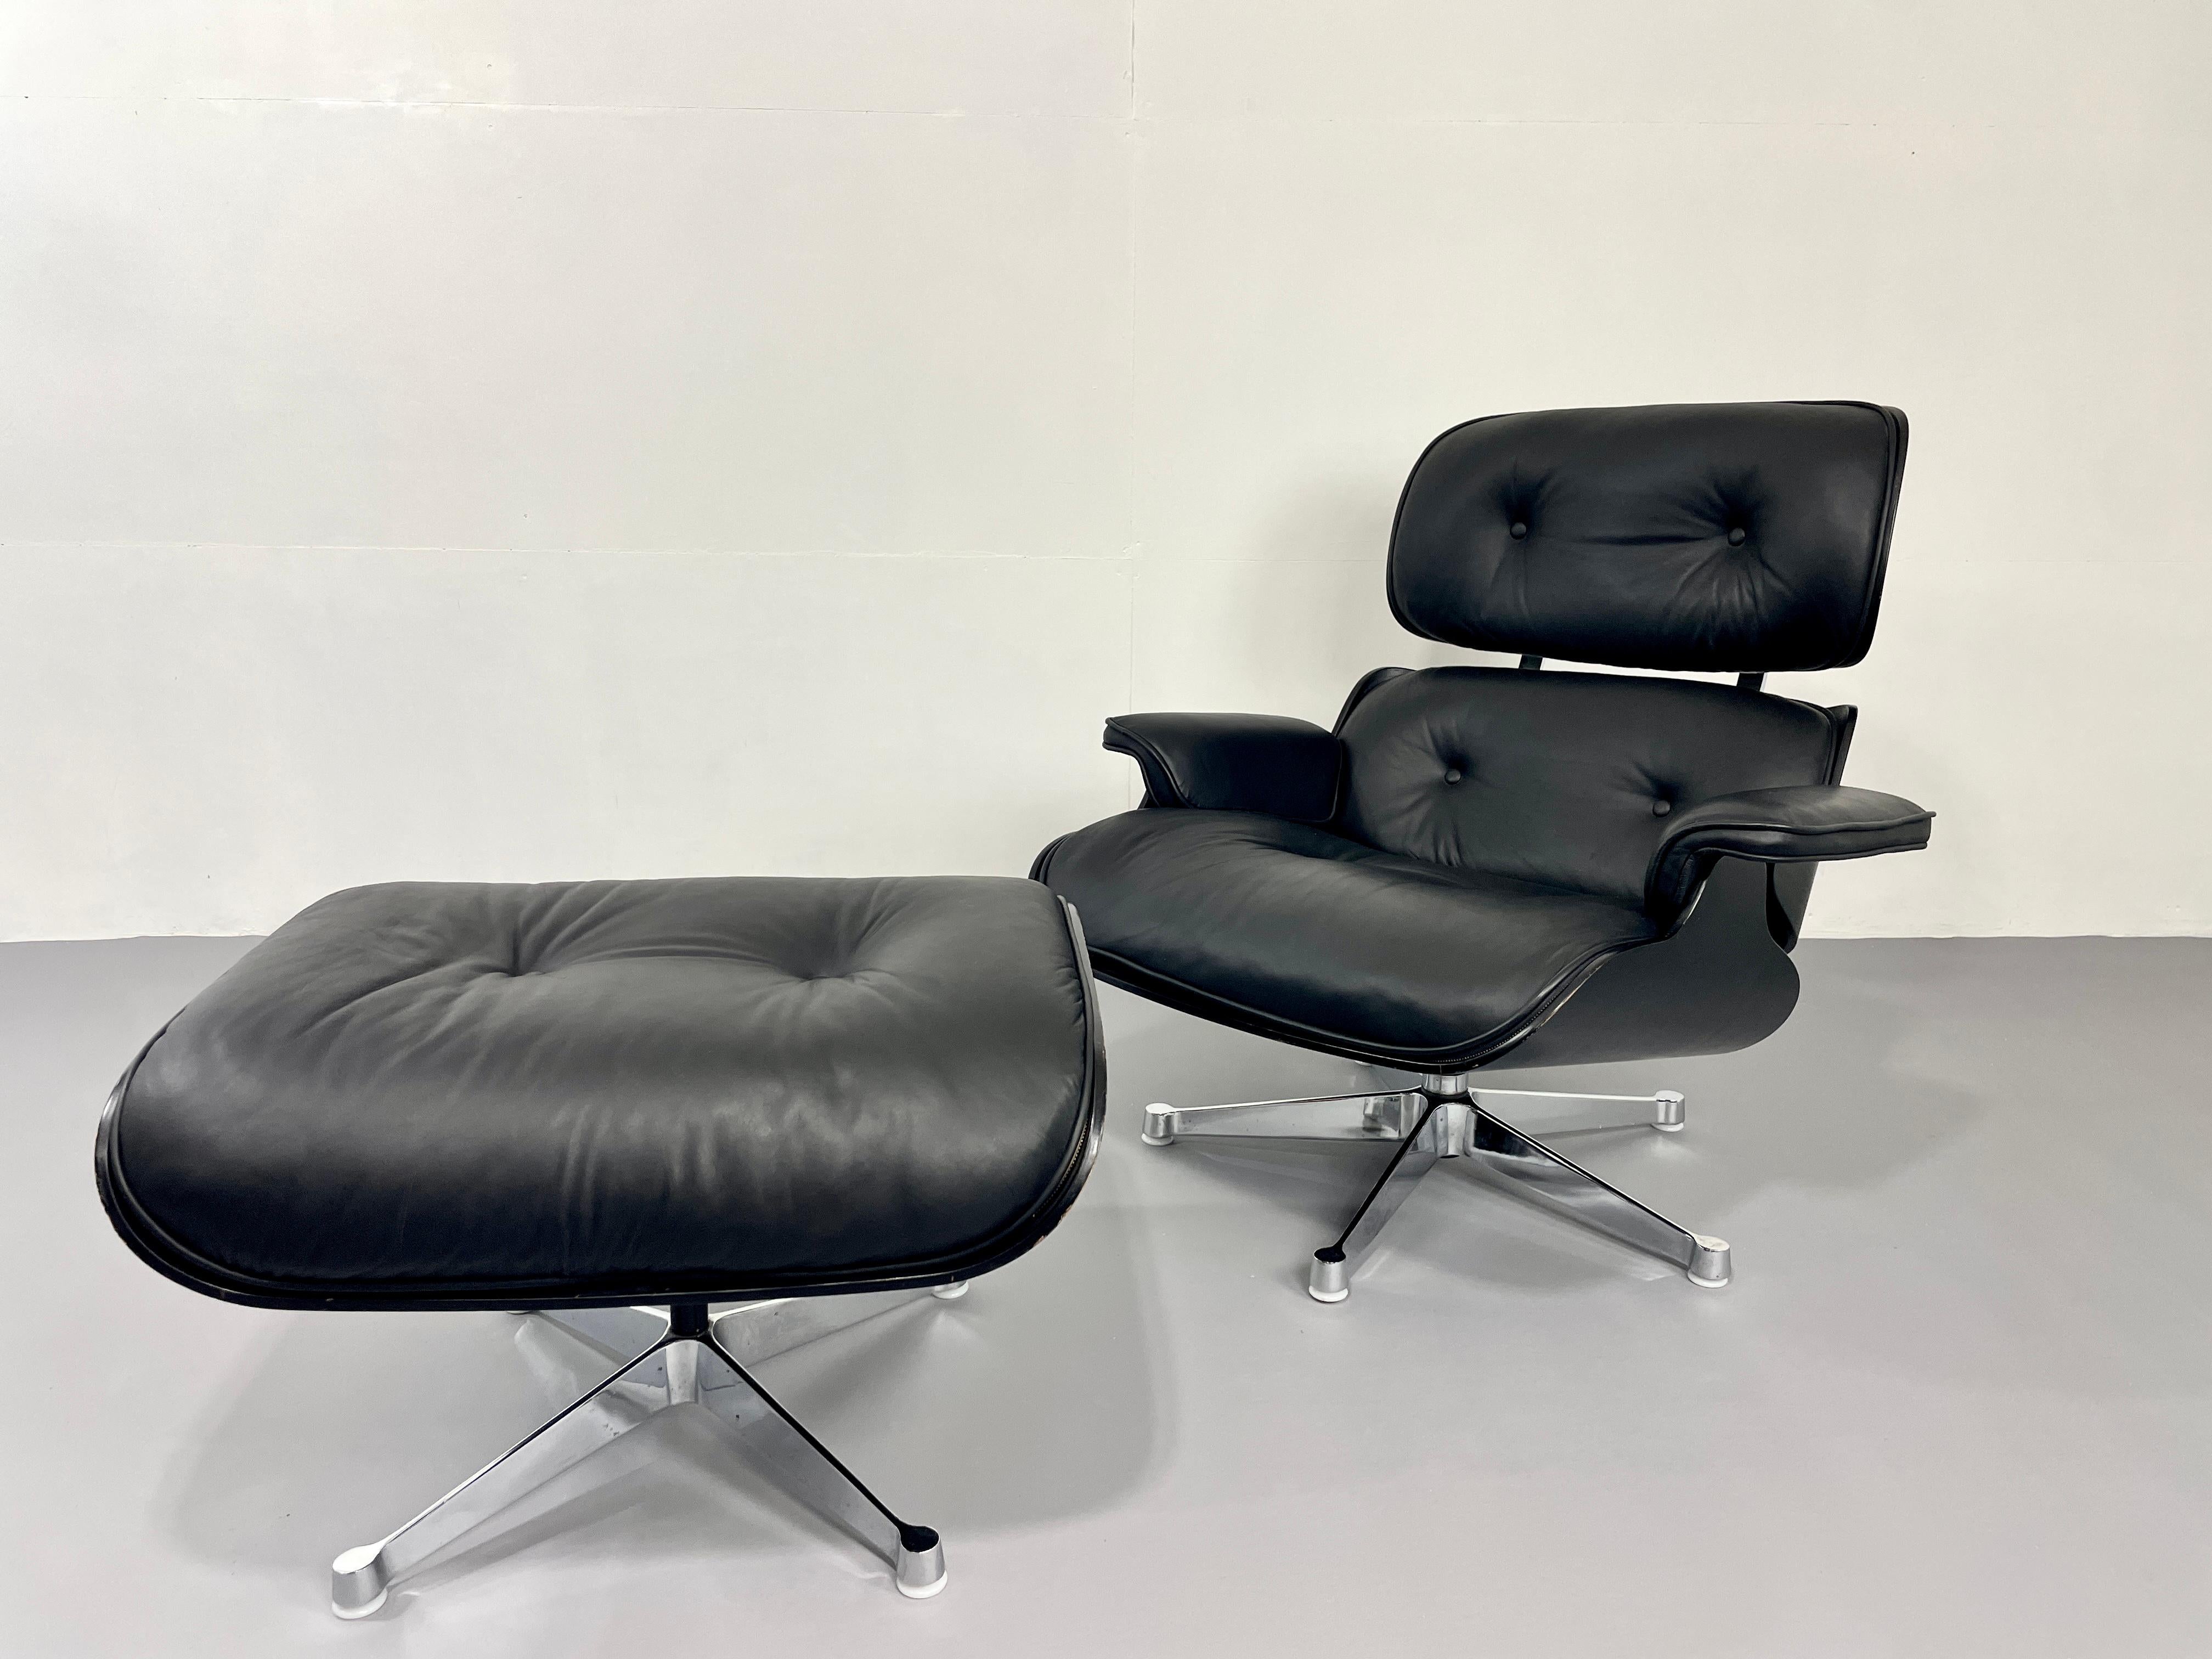 Black vintage Herman Miller Lounge Chair with Ottoman, designed by Eames  For Sale 6